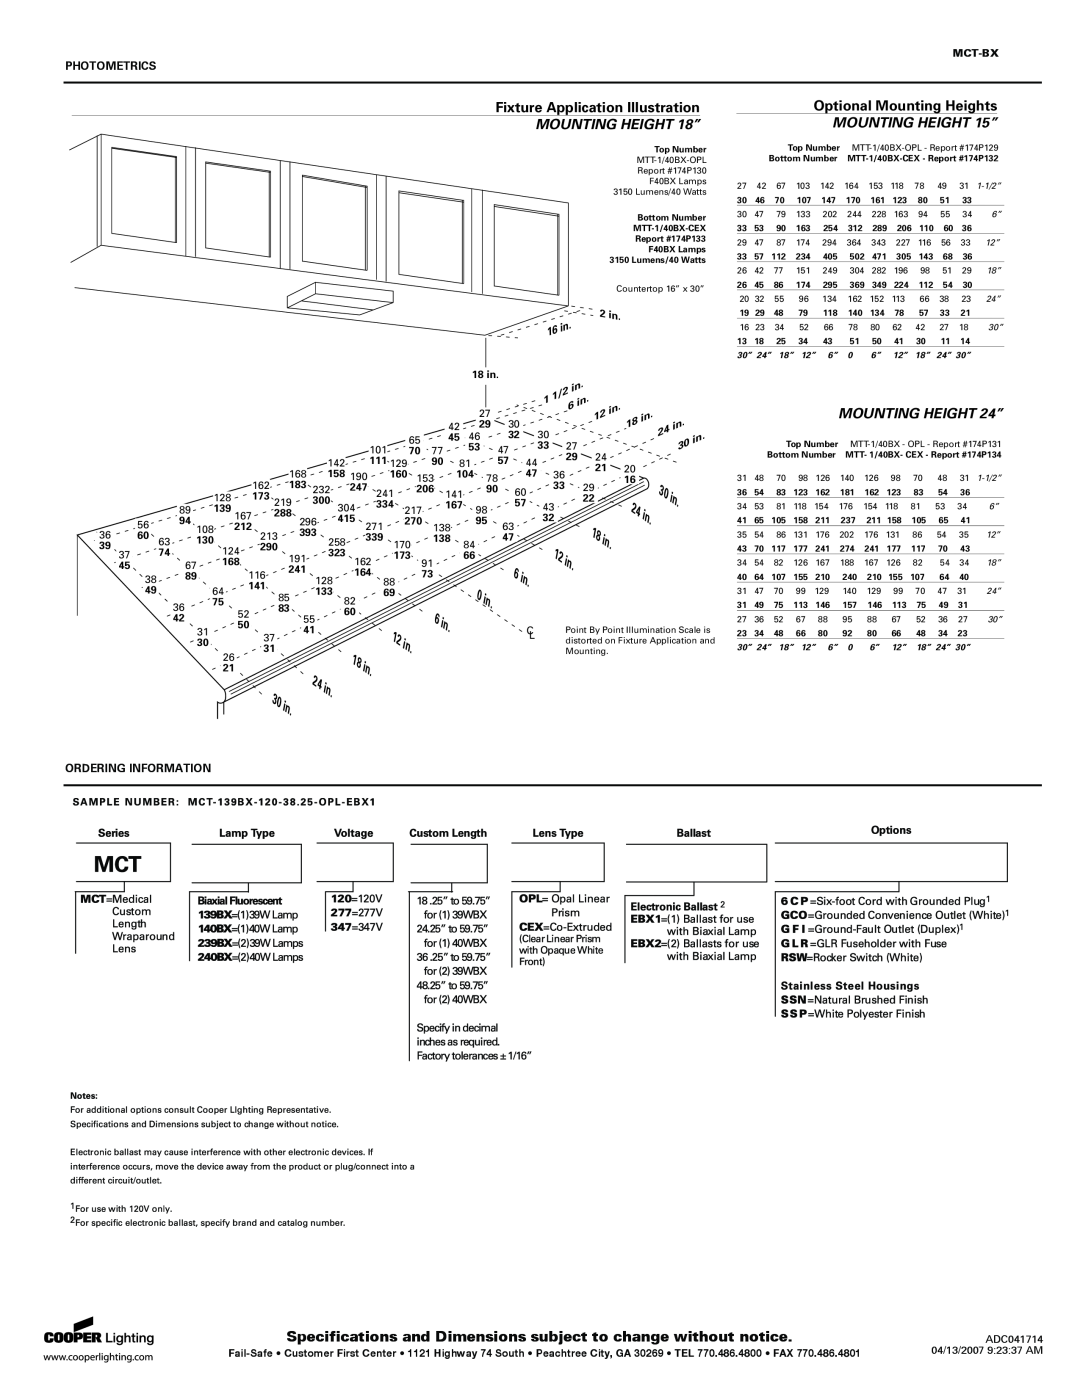 Cooper Lighting MCT-BX specifications 